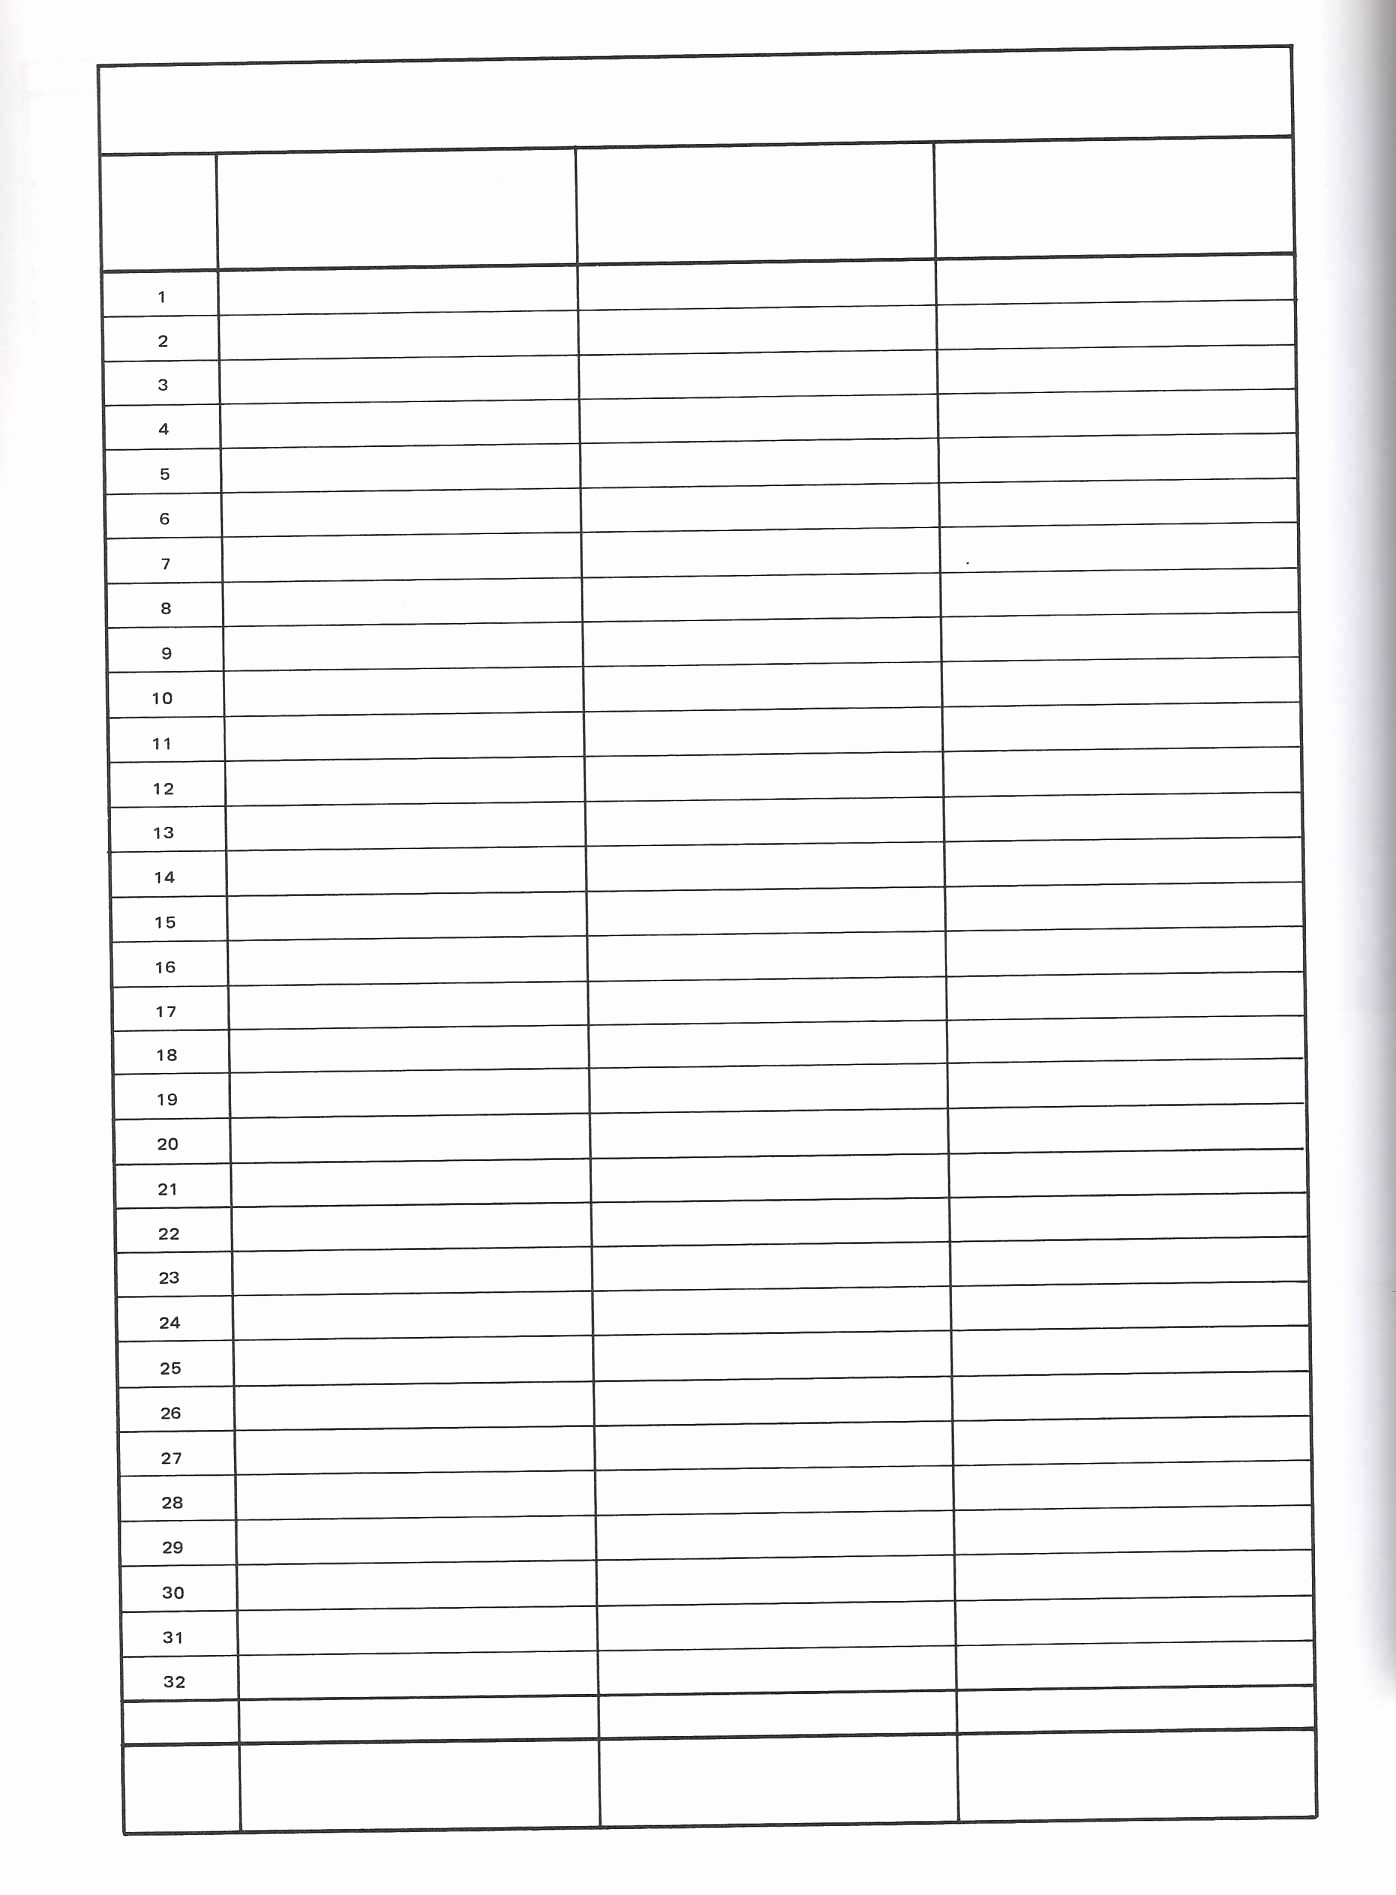 Blank Spreadsheet Printable How To Print Excel With Gridlines Luxury Document